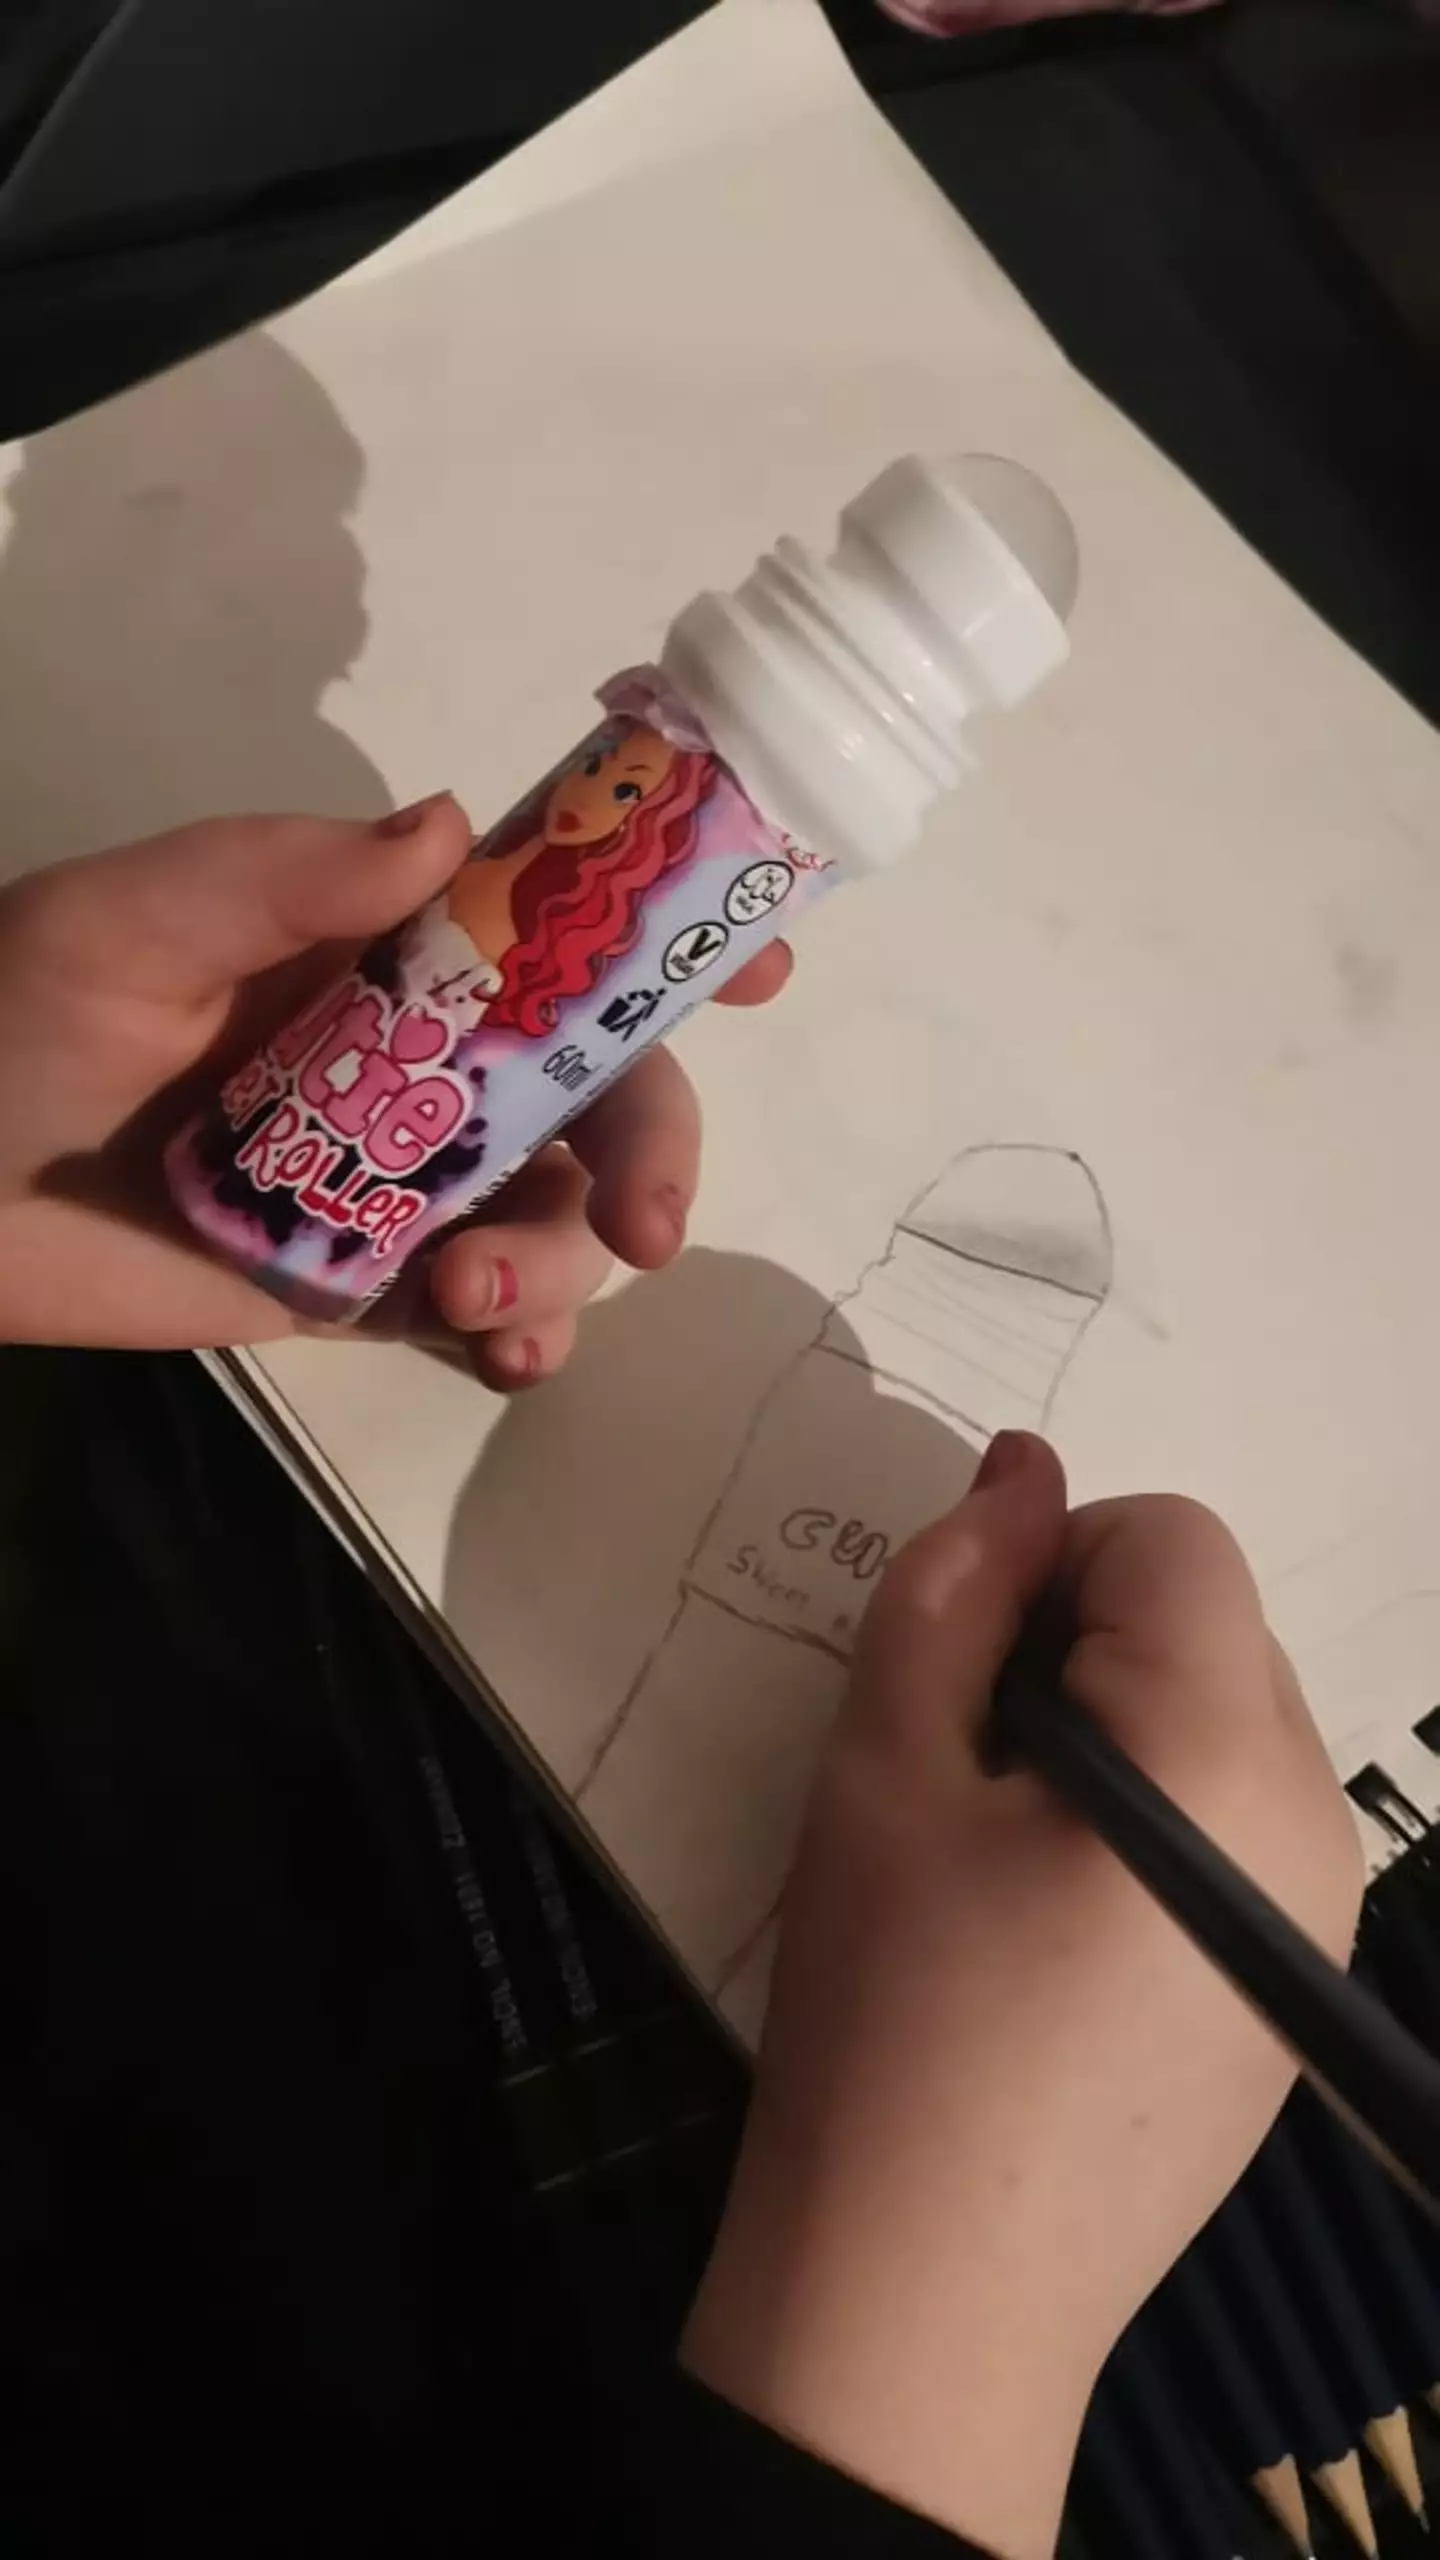 Here's what she was ACTUALLY drawing.